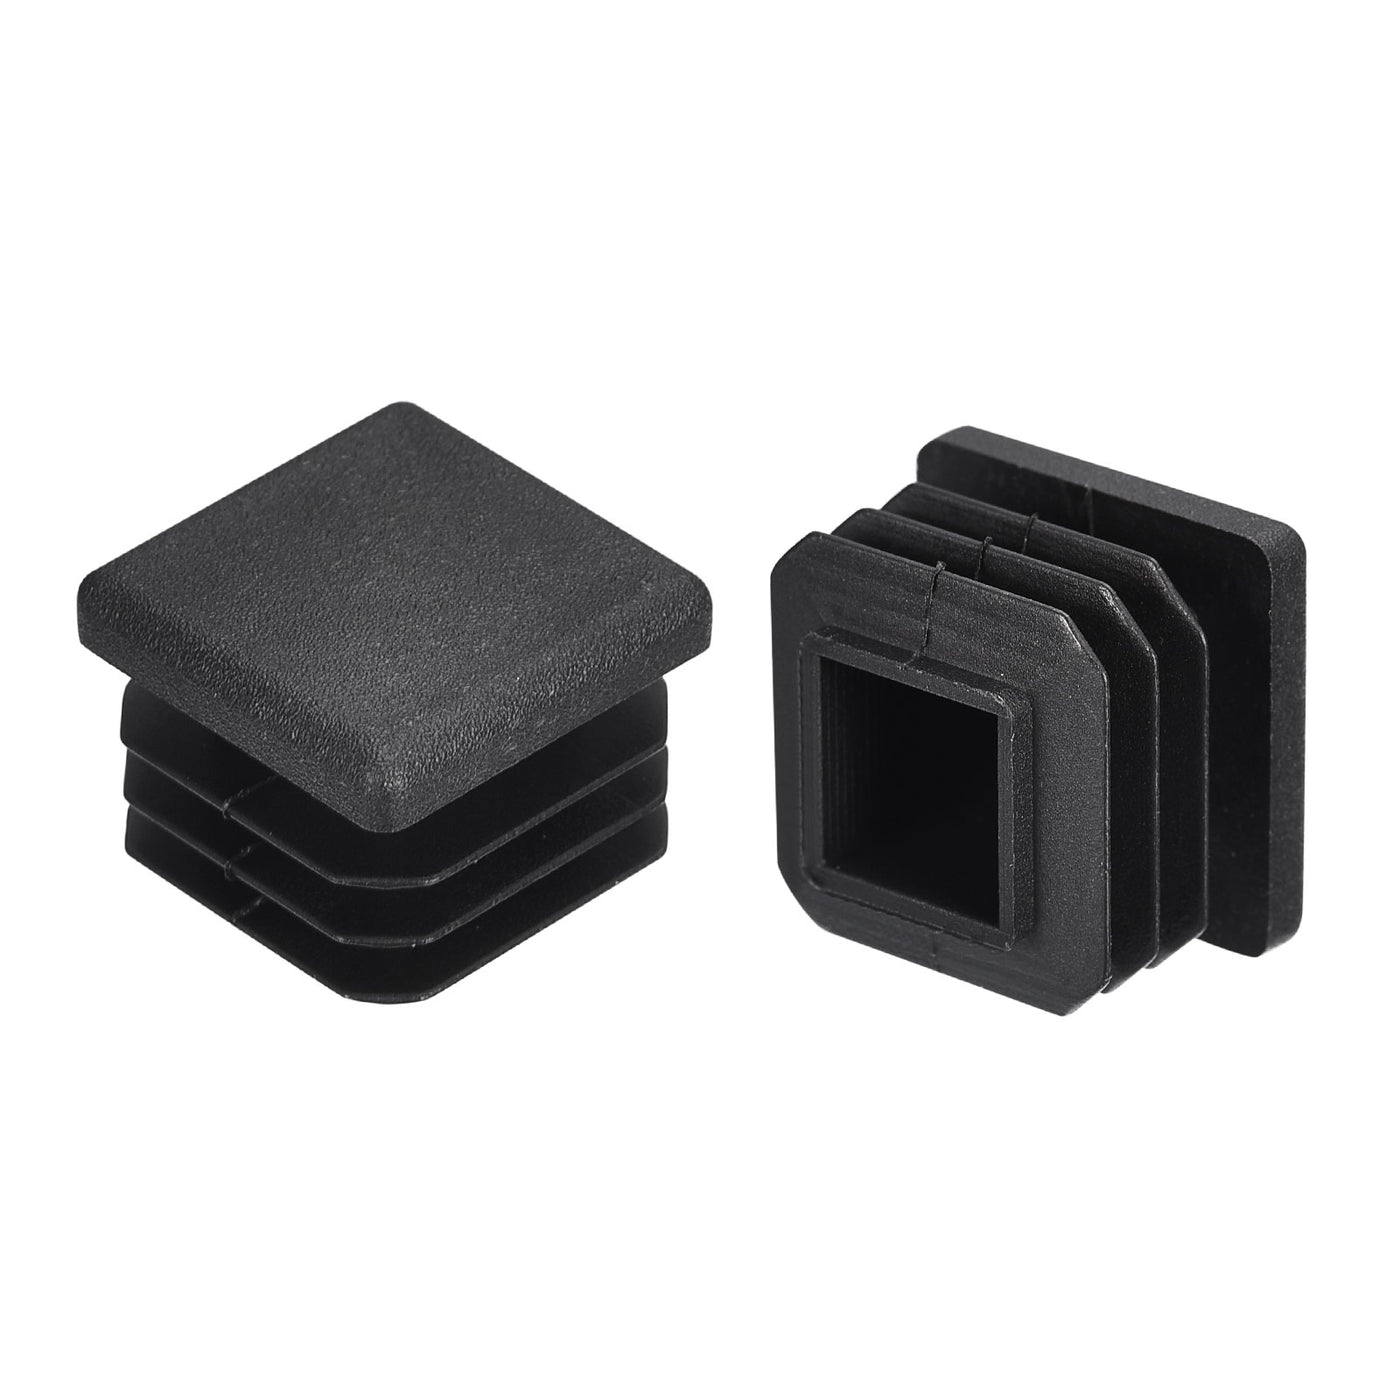 uxcell Uxcell 10Pcs 20mmx20mm(0.79inch) Plastic Tubing Plug Square Post End Caps Black